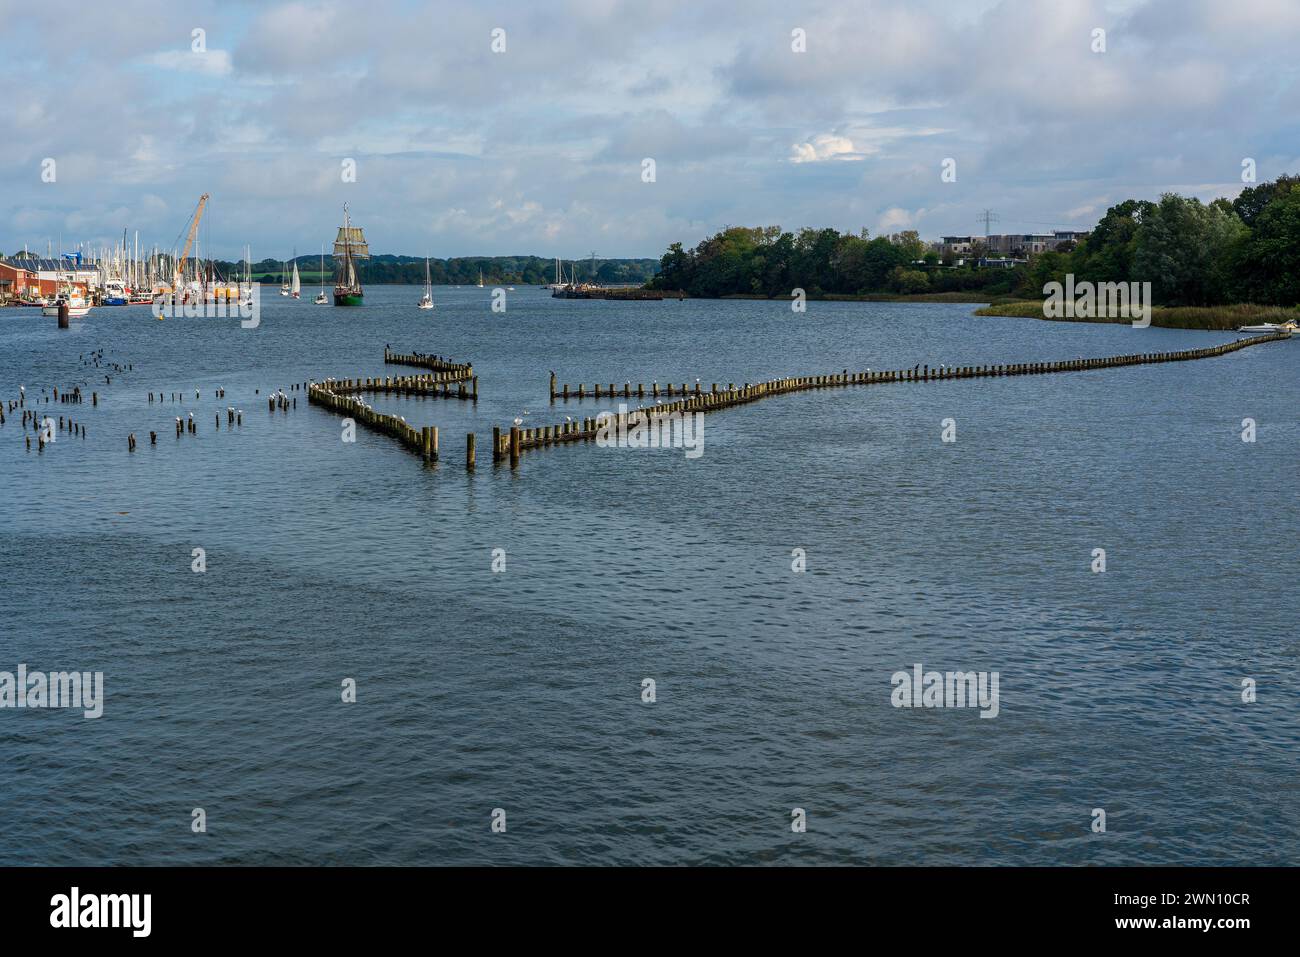 View of Schlei River near Kappeln, Germany. Stock Photo